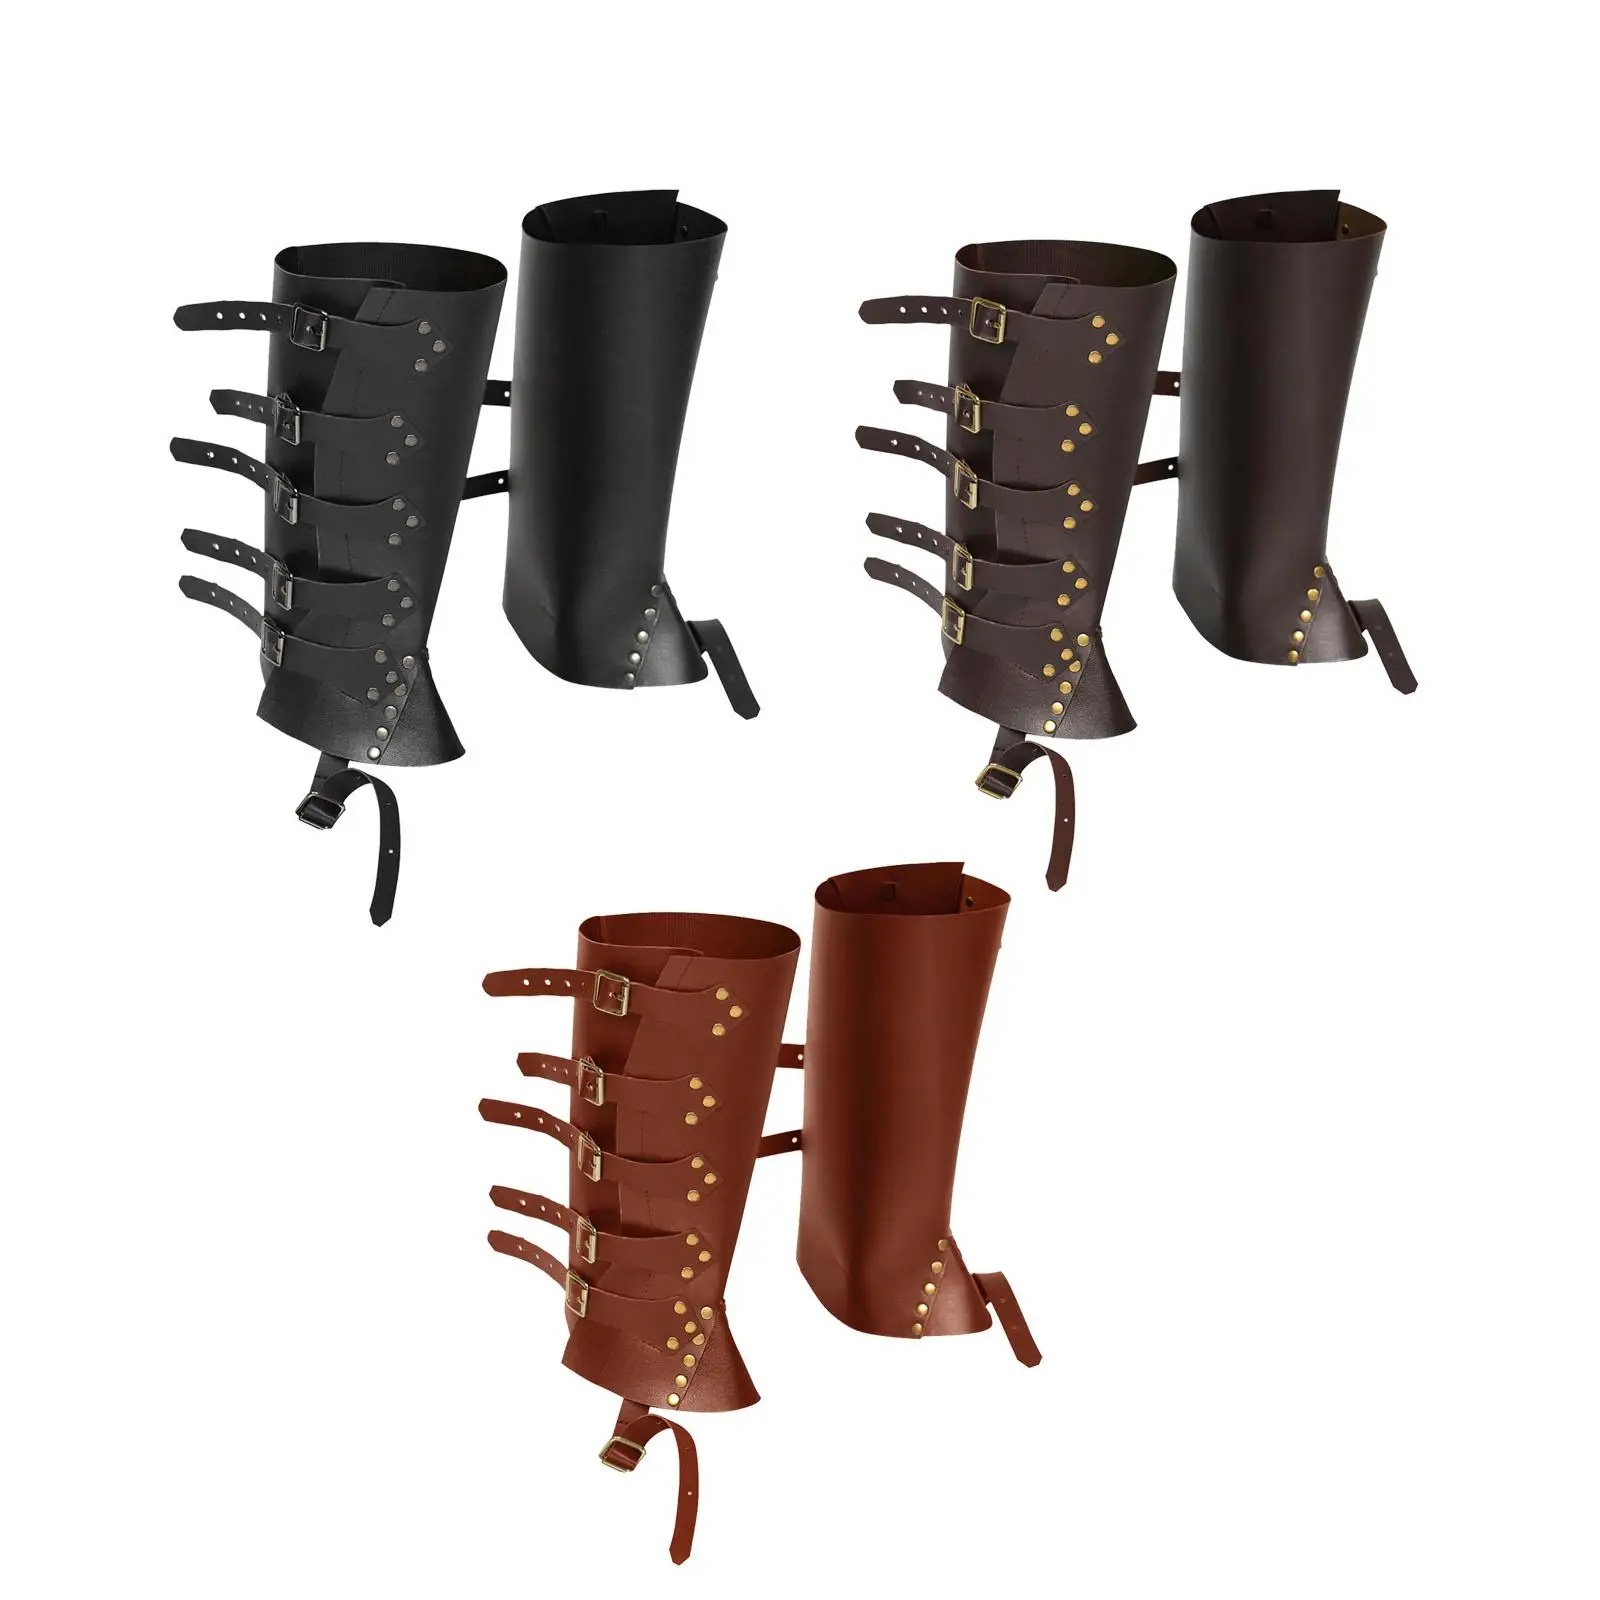 Vintage Style Medieval Boots Shoes Cover Waterproof Knight Costume Accessories Faux Leather Leg Guards Pirate Boots Tops Covers